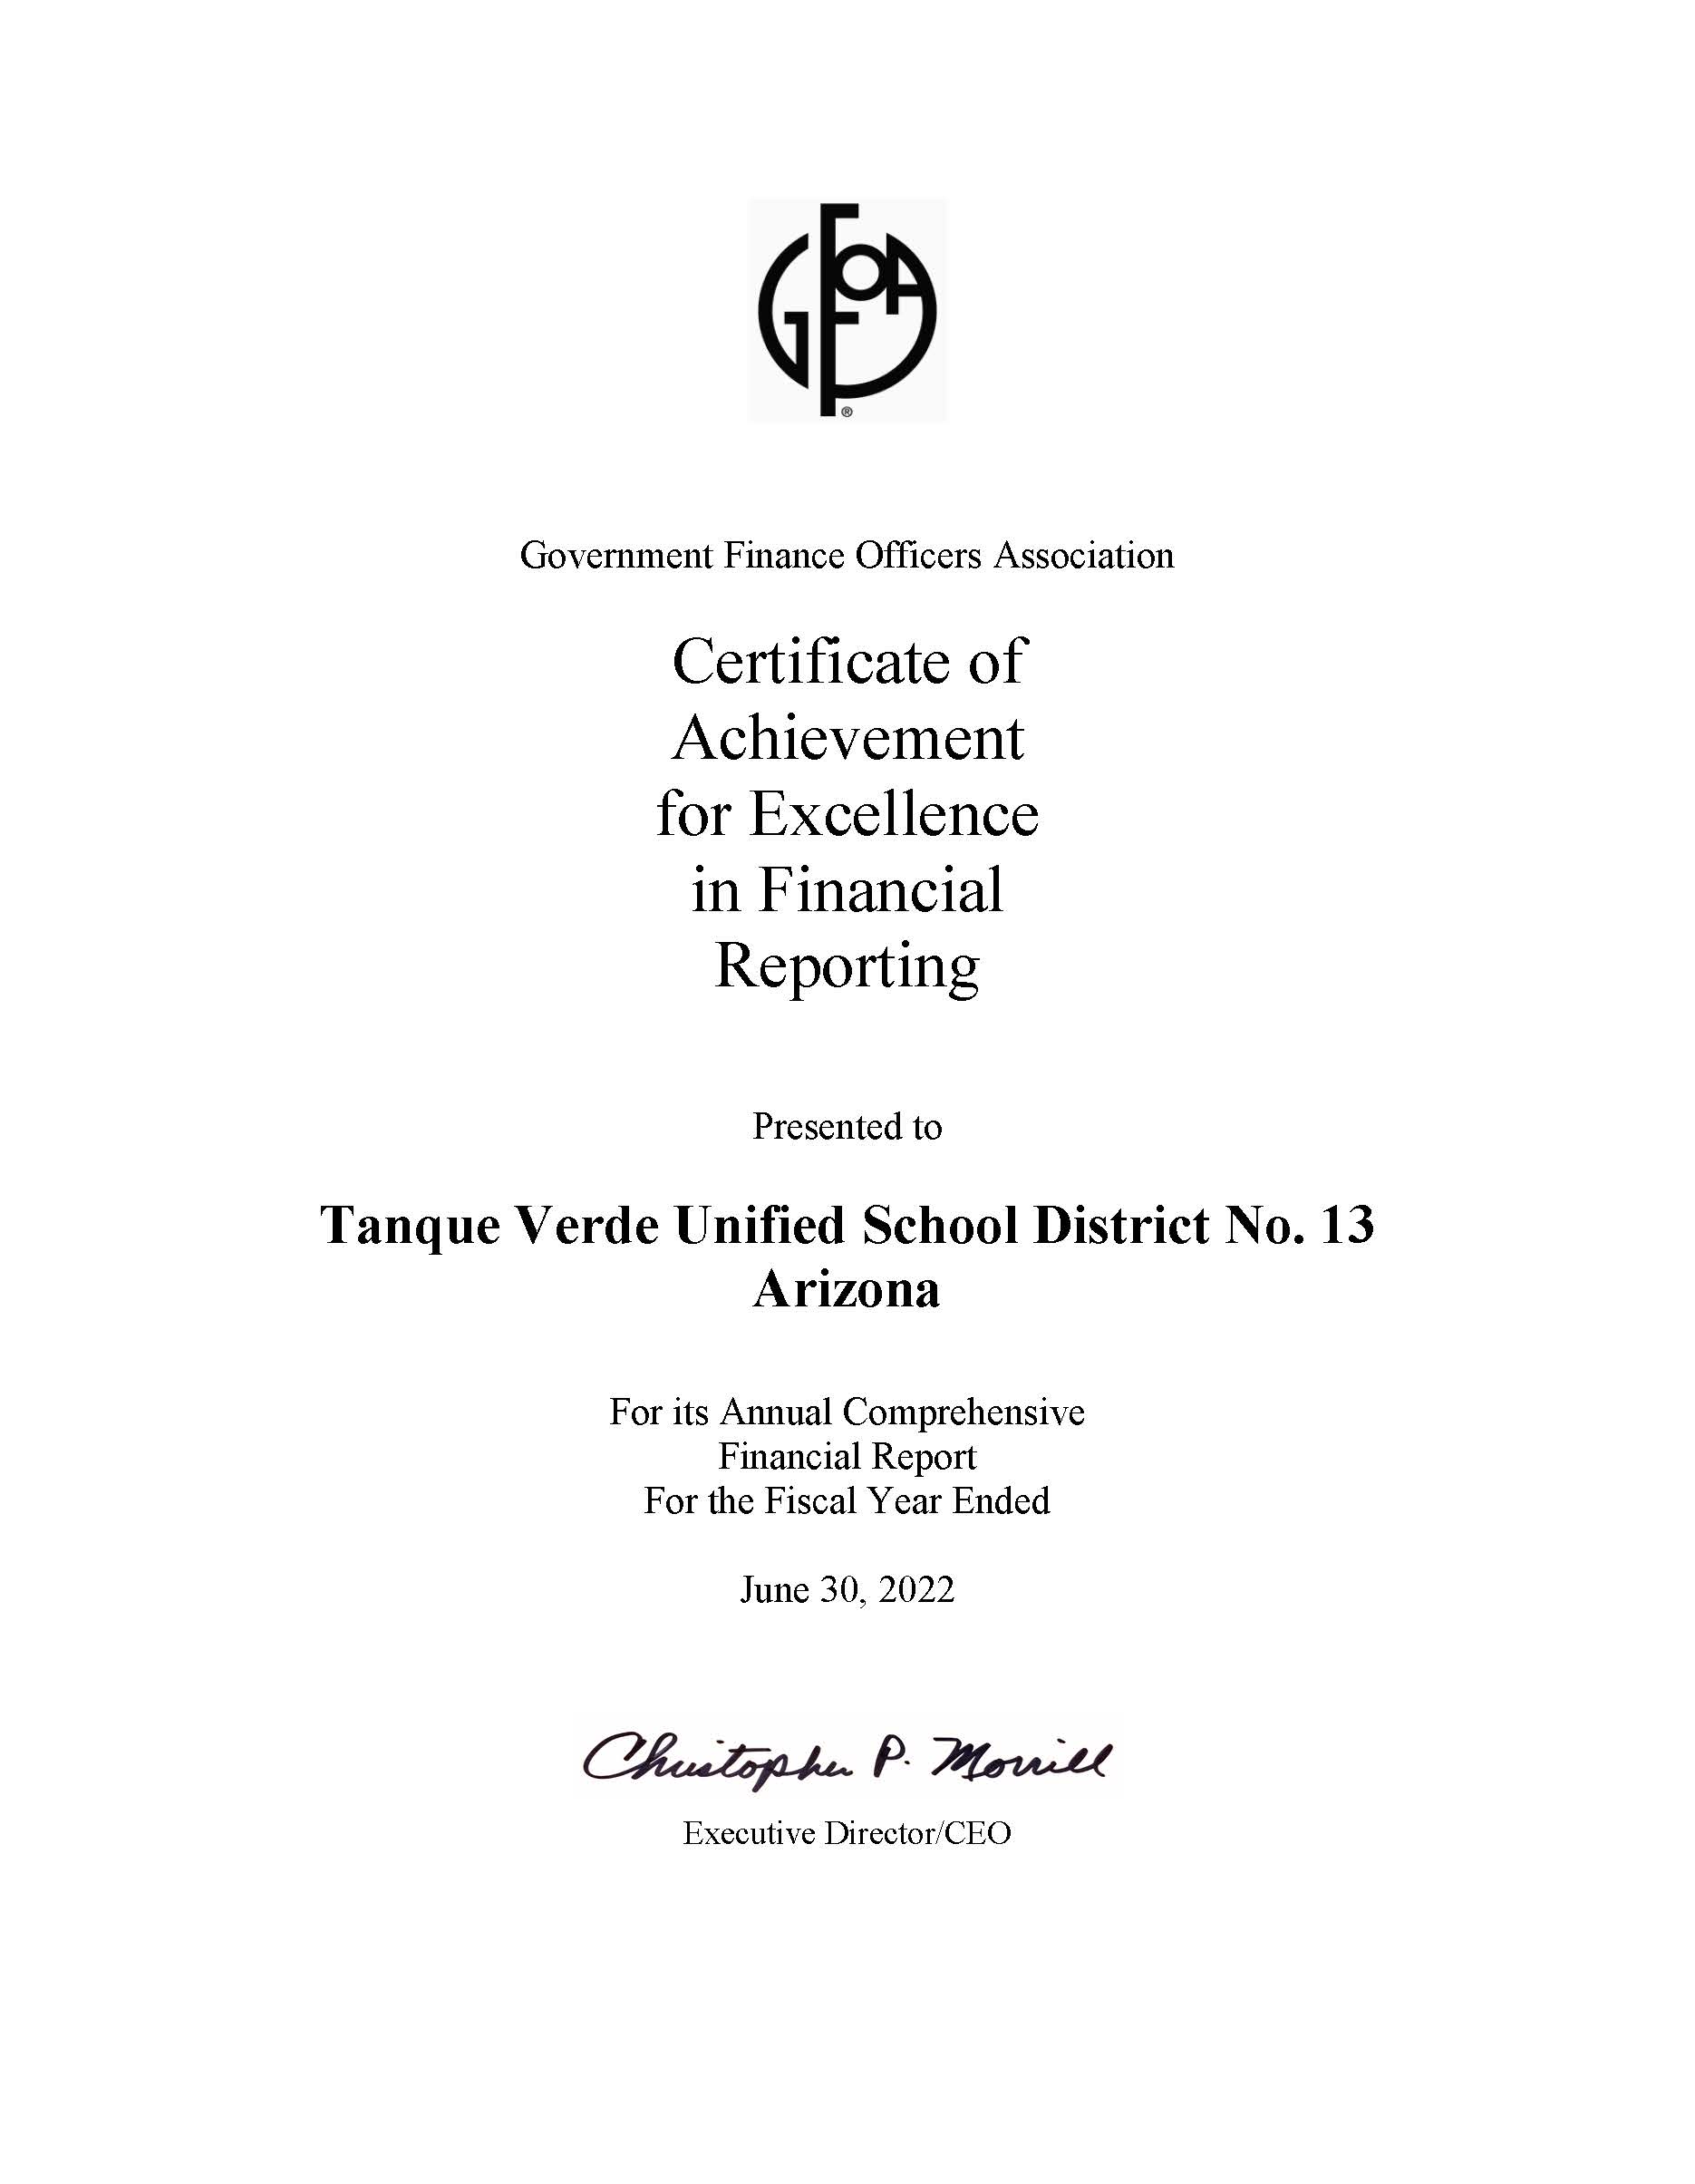 GFOA Certificate of Achievement for Excellence in Financial Reporting 